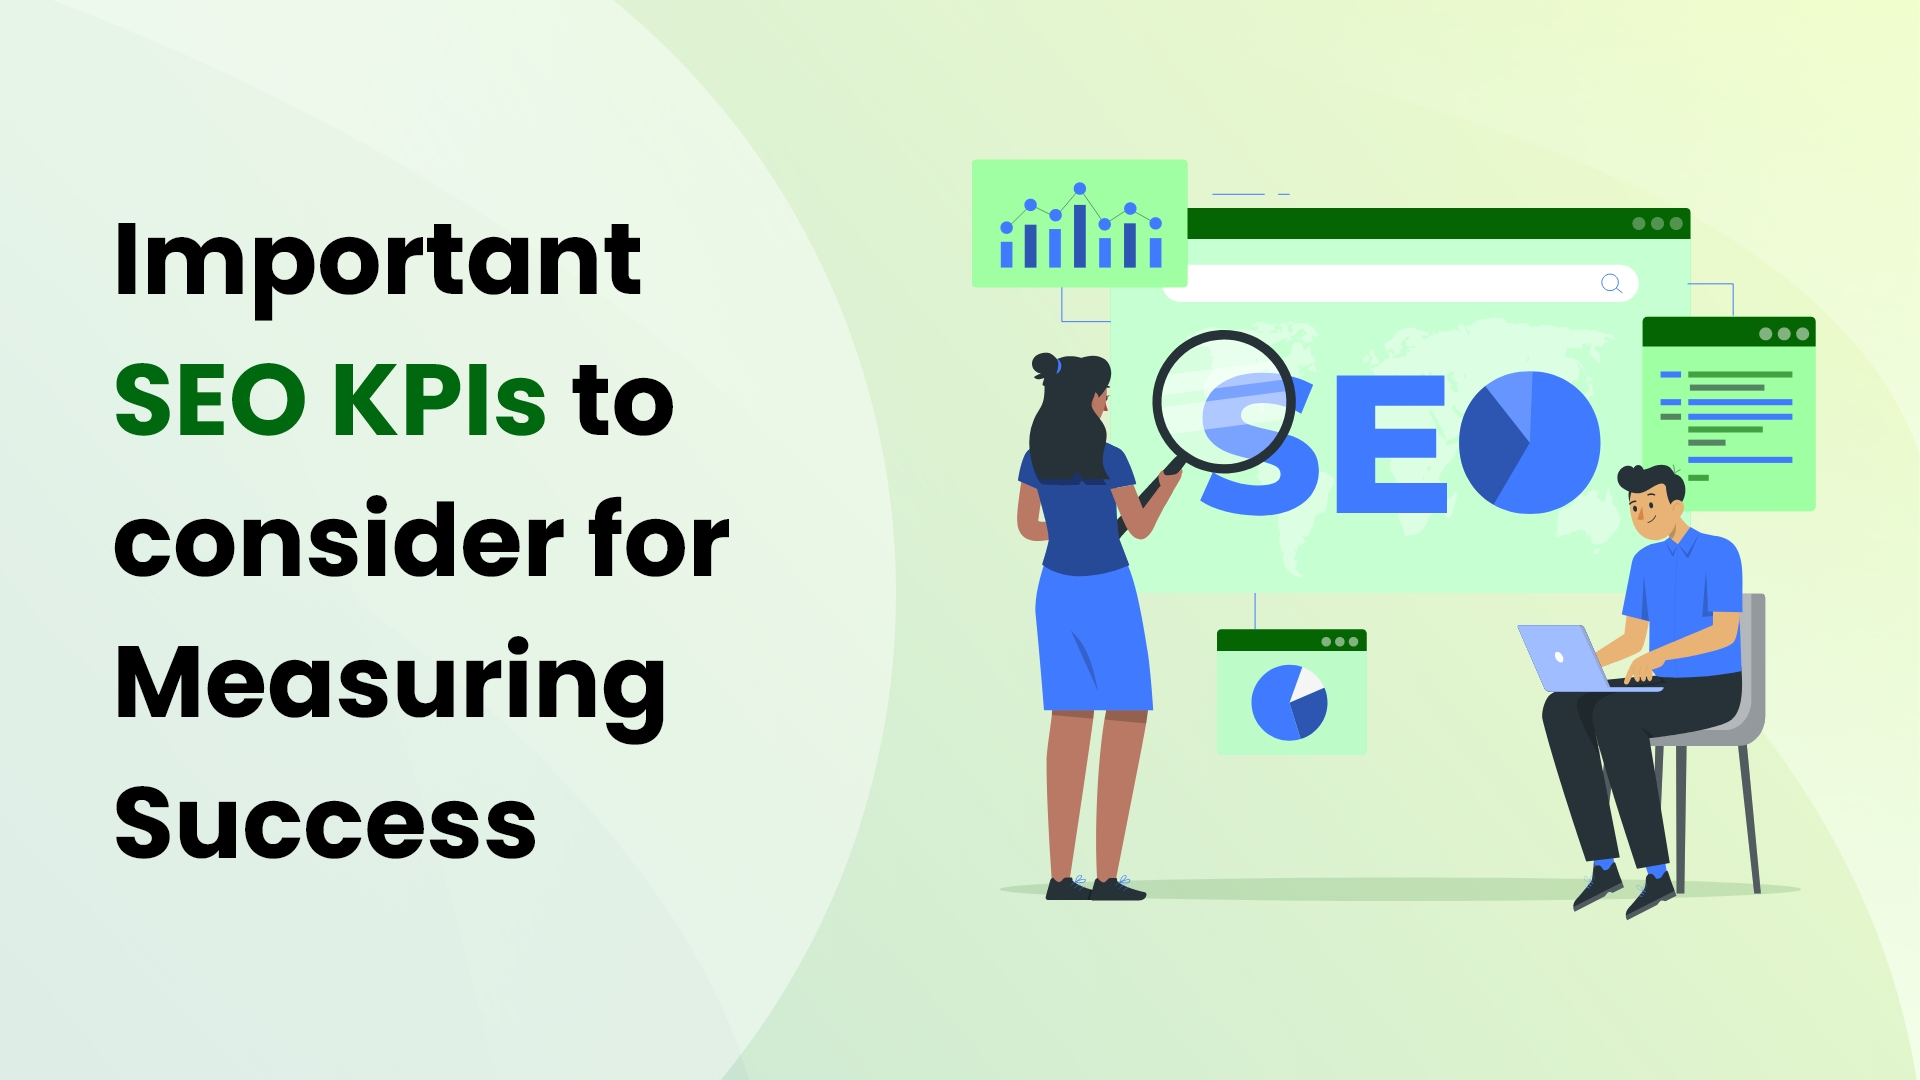 Important SEO KPIs to consider for Measuring Success